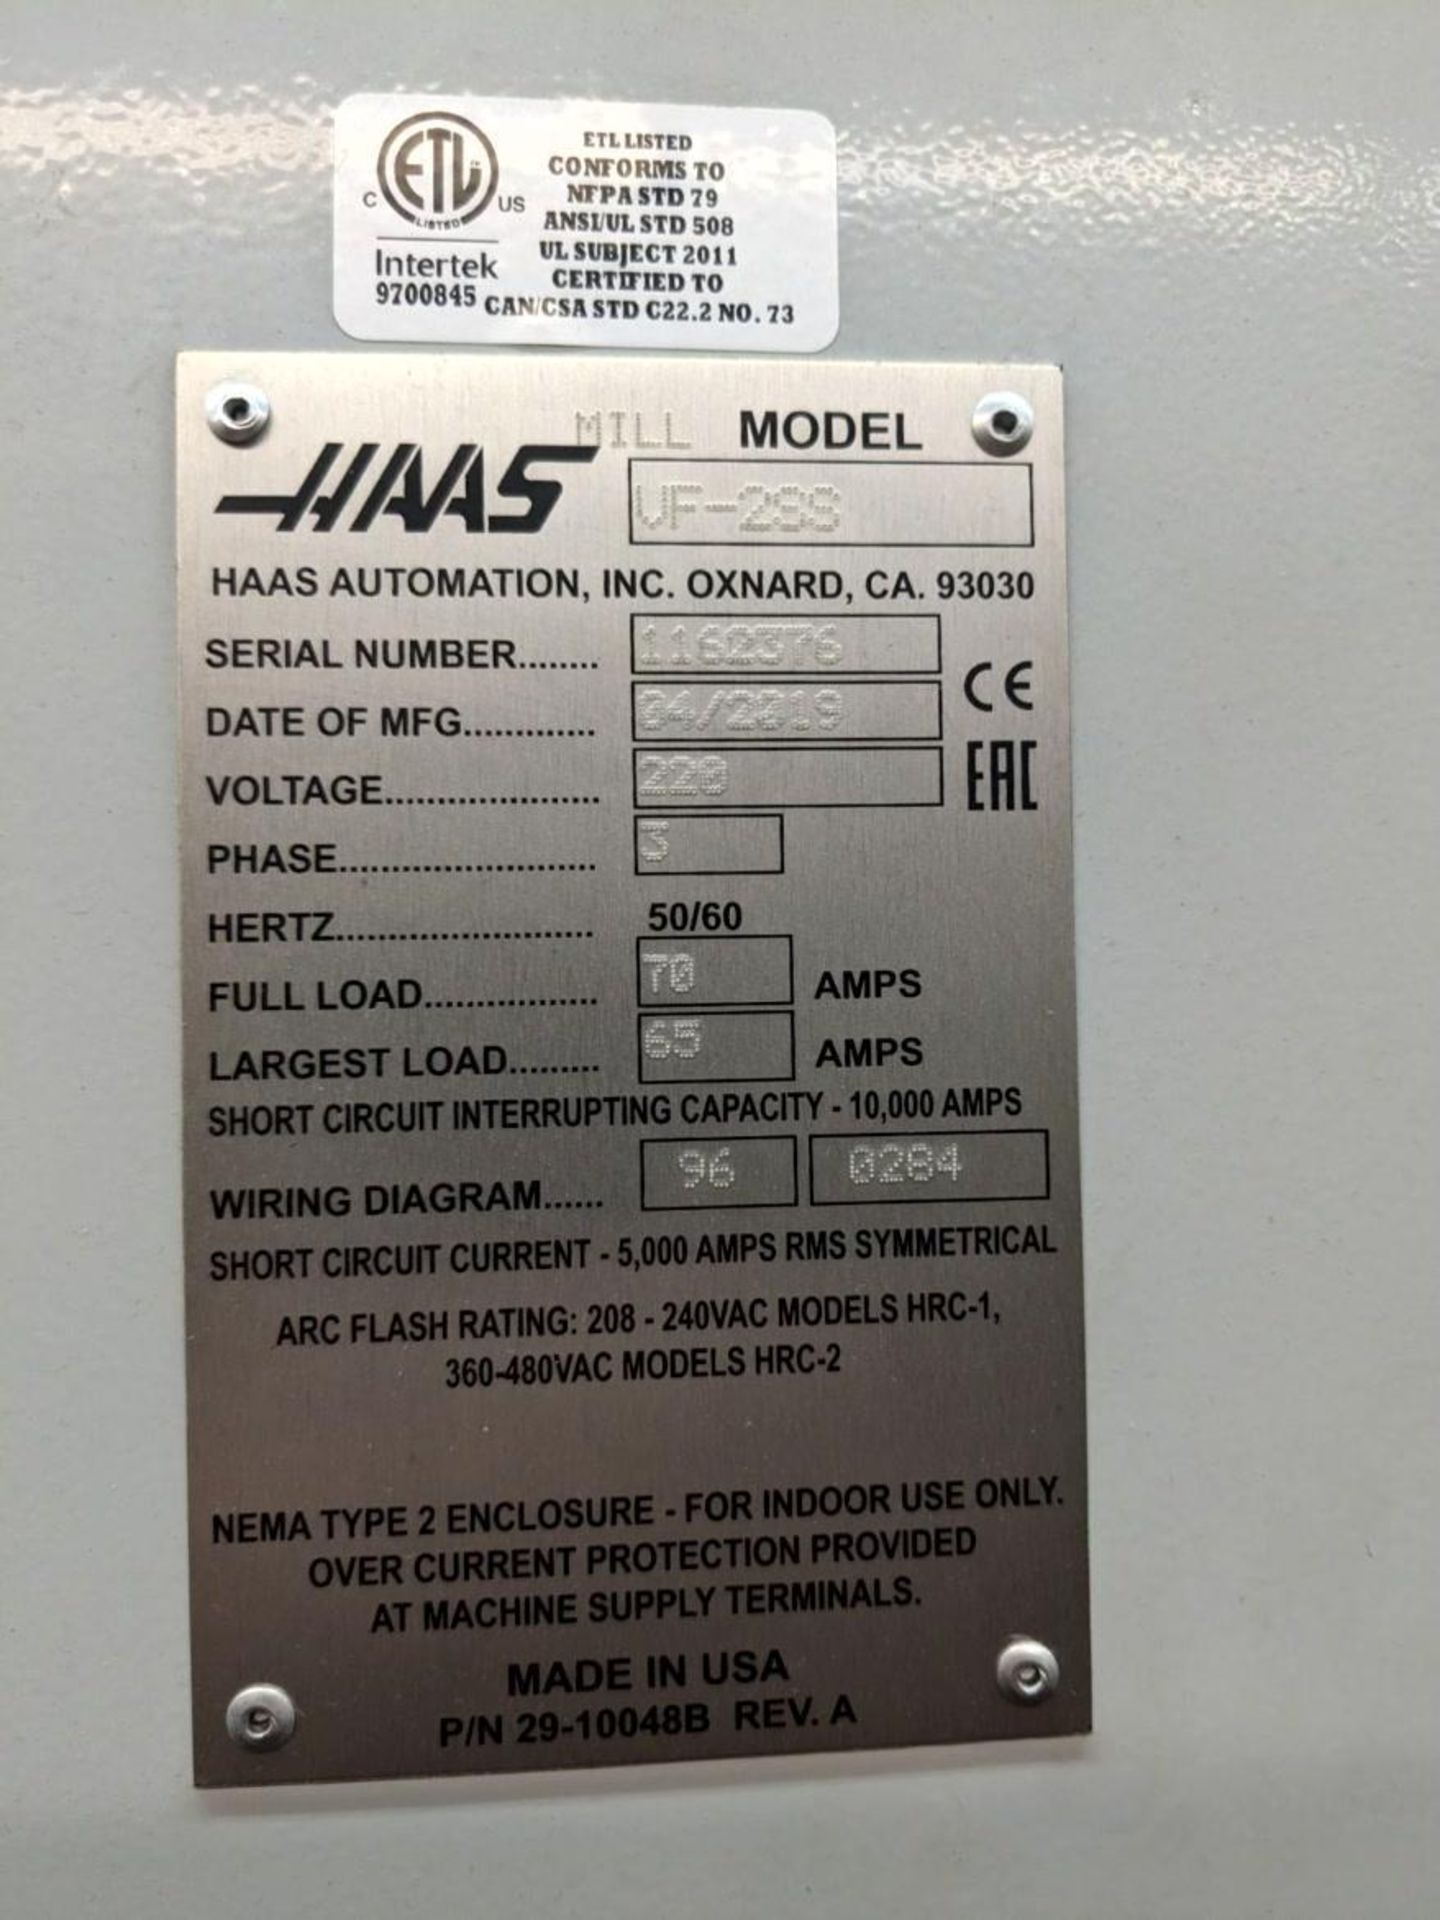 HAAS VF-2SS VMC, 2019 - HIGH SPEED MACHINING, RIGID TAPPING, TSC READY - Image 10 of 10